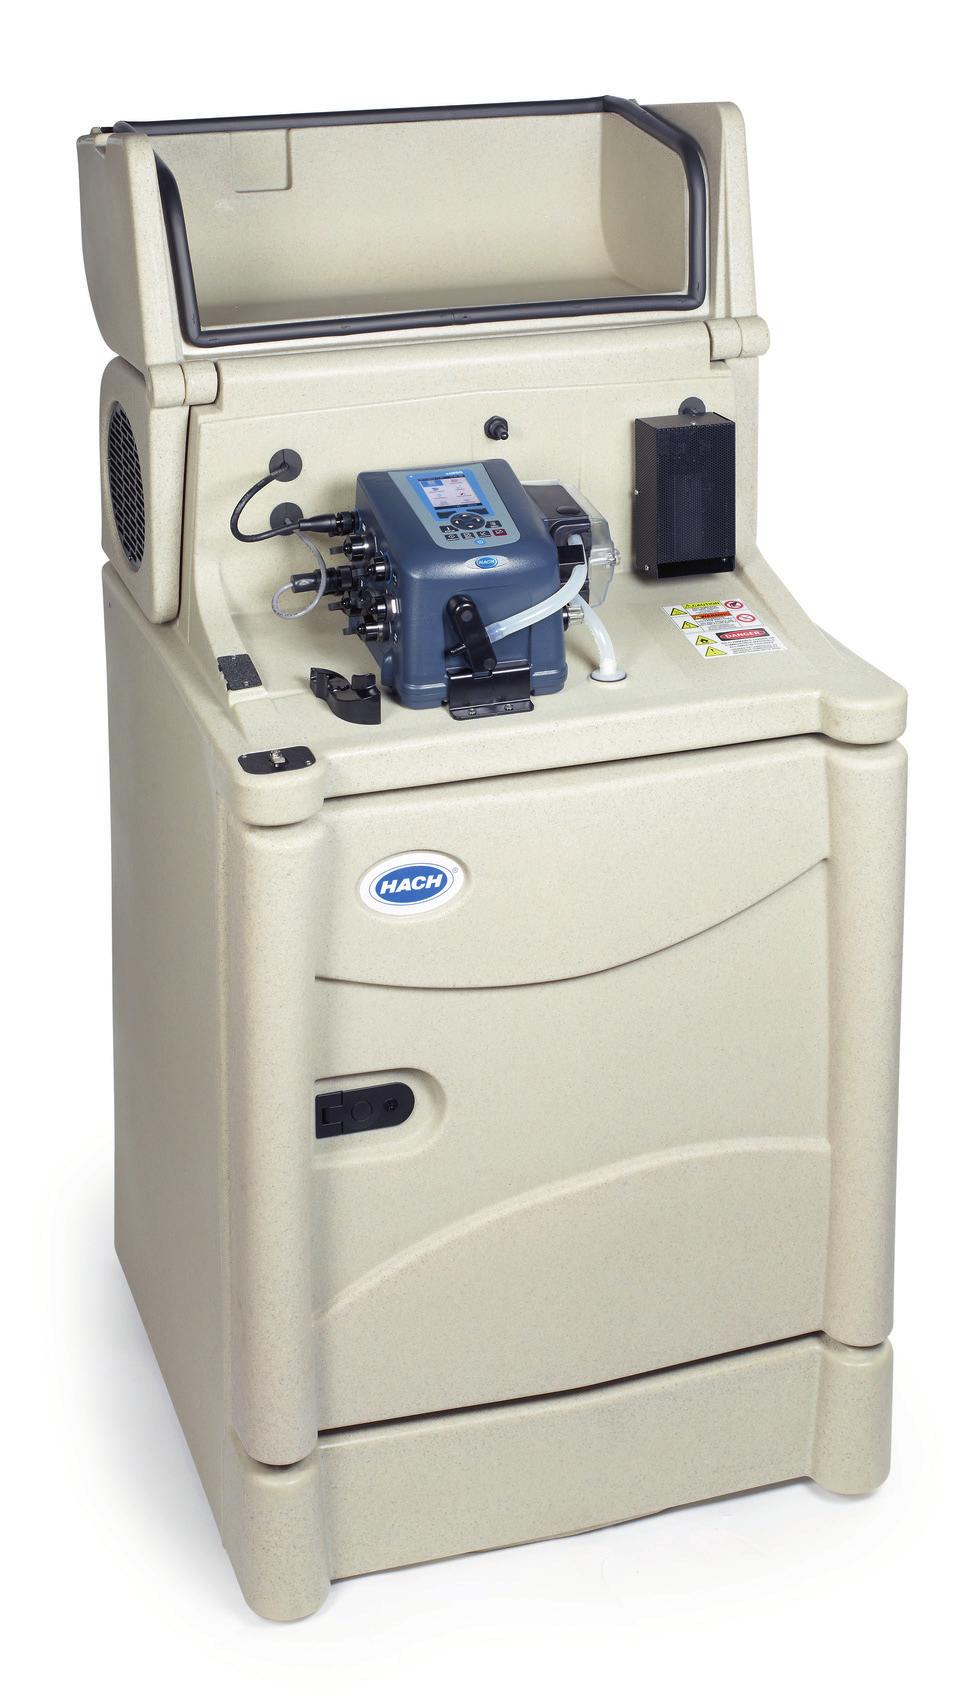 AS950 ALL-WEATHER REFRIGERATED SAMPLER Applications Wastewater Collection systems Industrial pretreatment Environmental monitoring Stormwater Sampling has never been this easy.